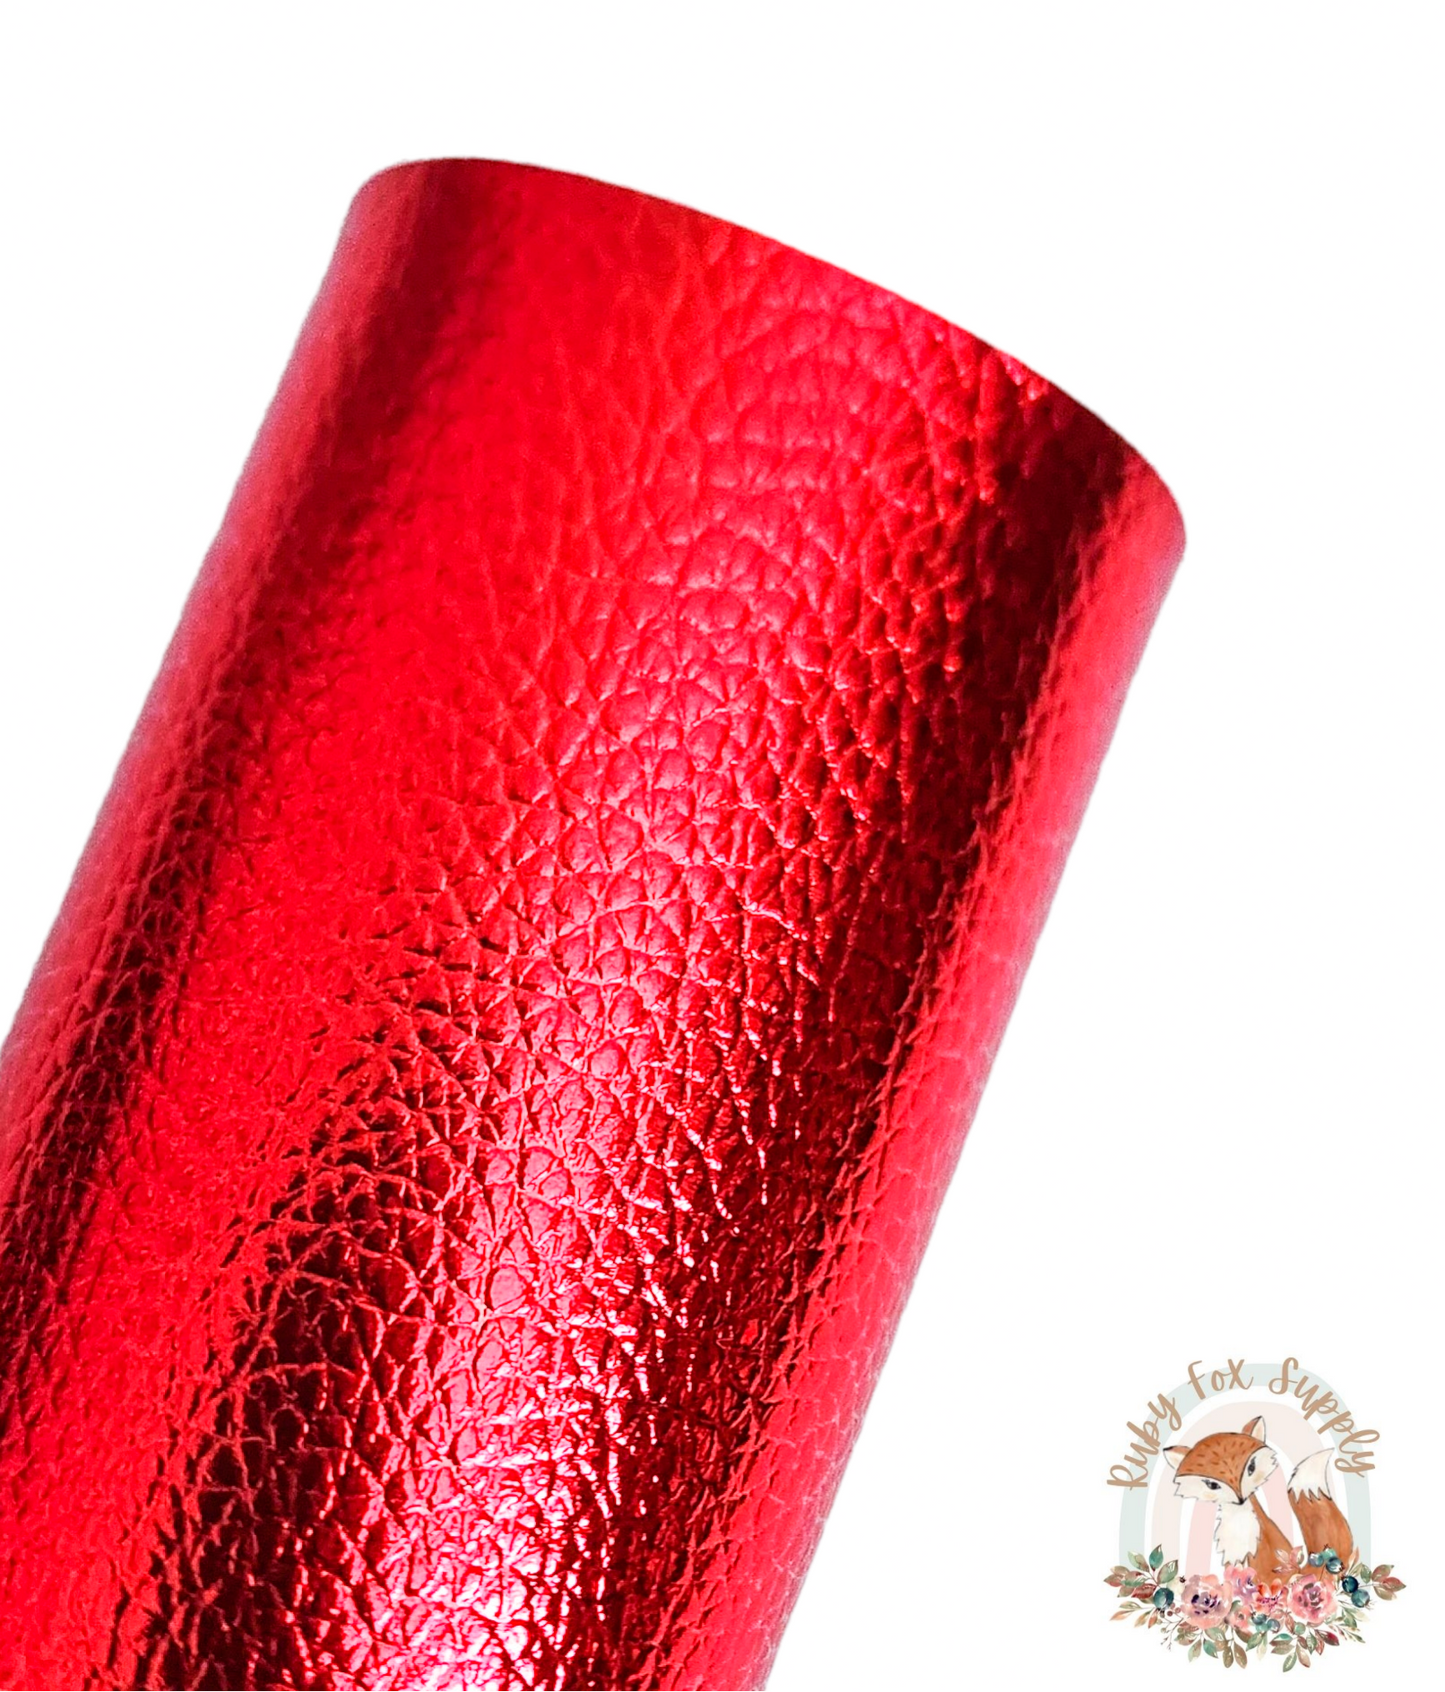 Metallic Red Pebbled 9x12 faux leather sheet